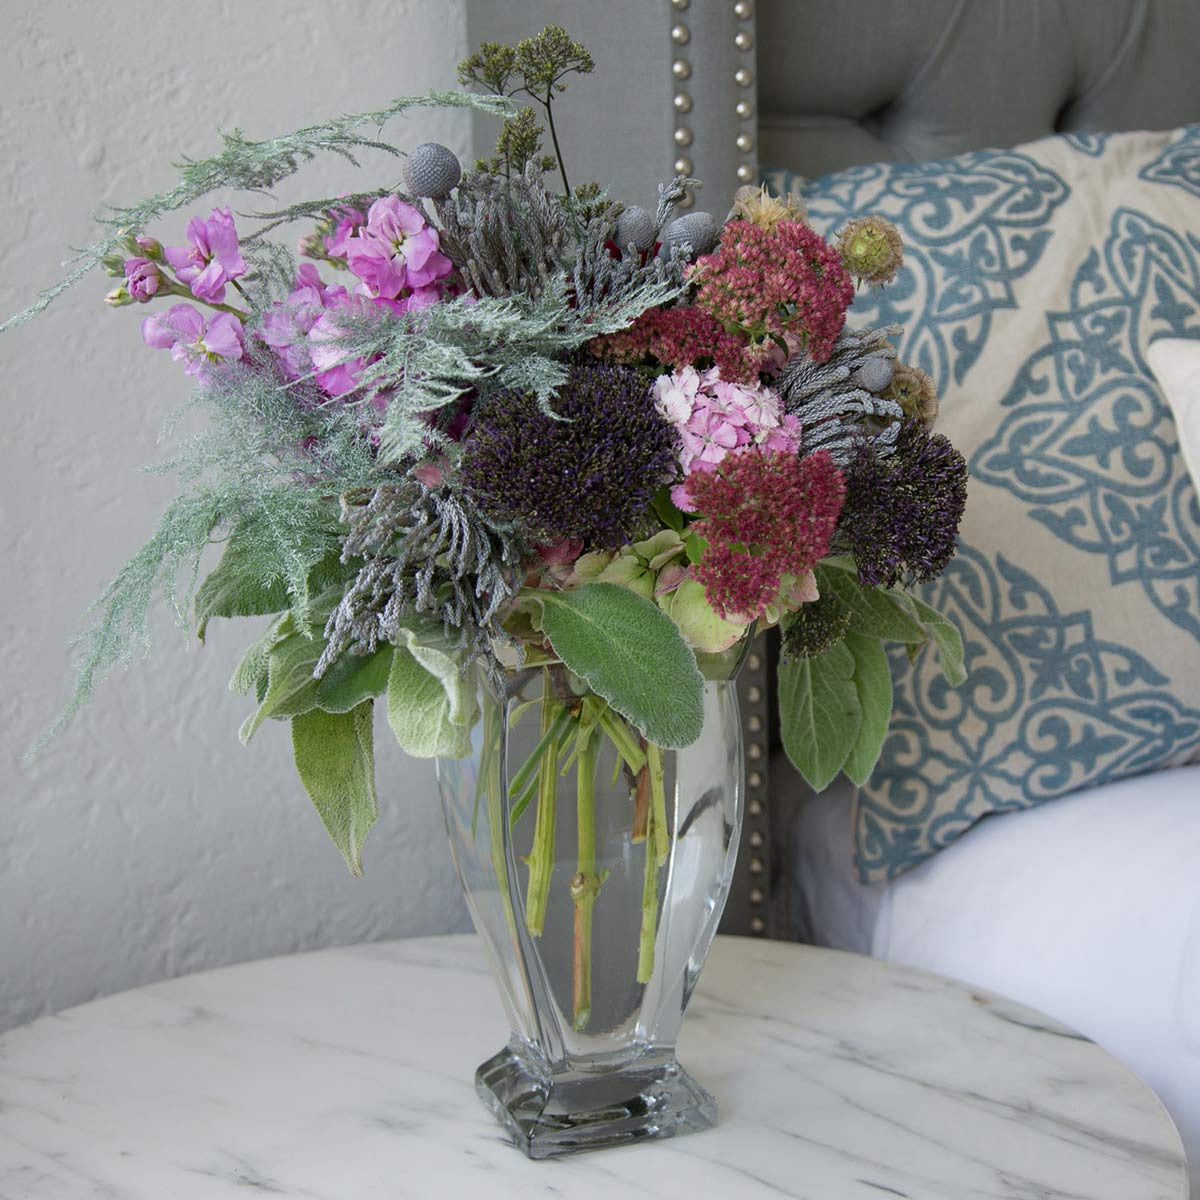 small regal vase filled with flowers on a nightstand